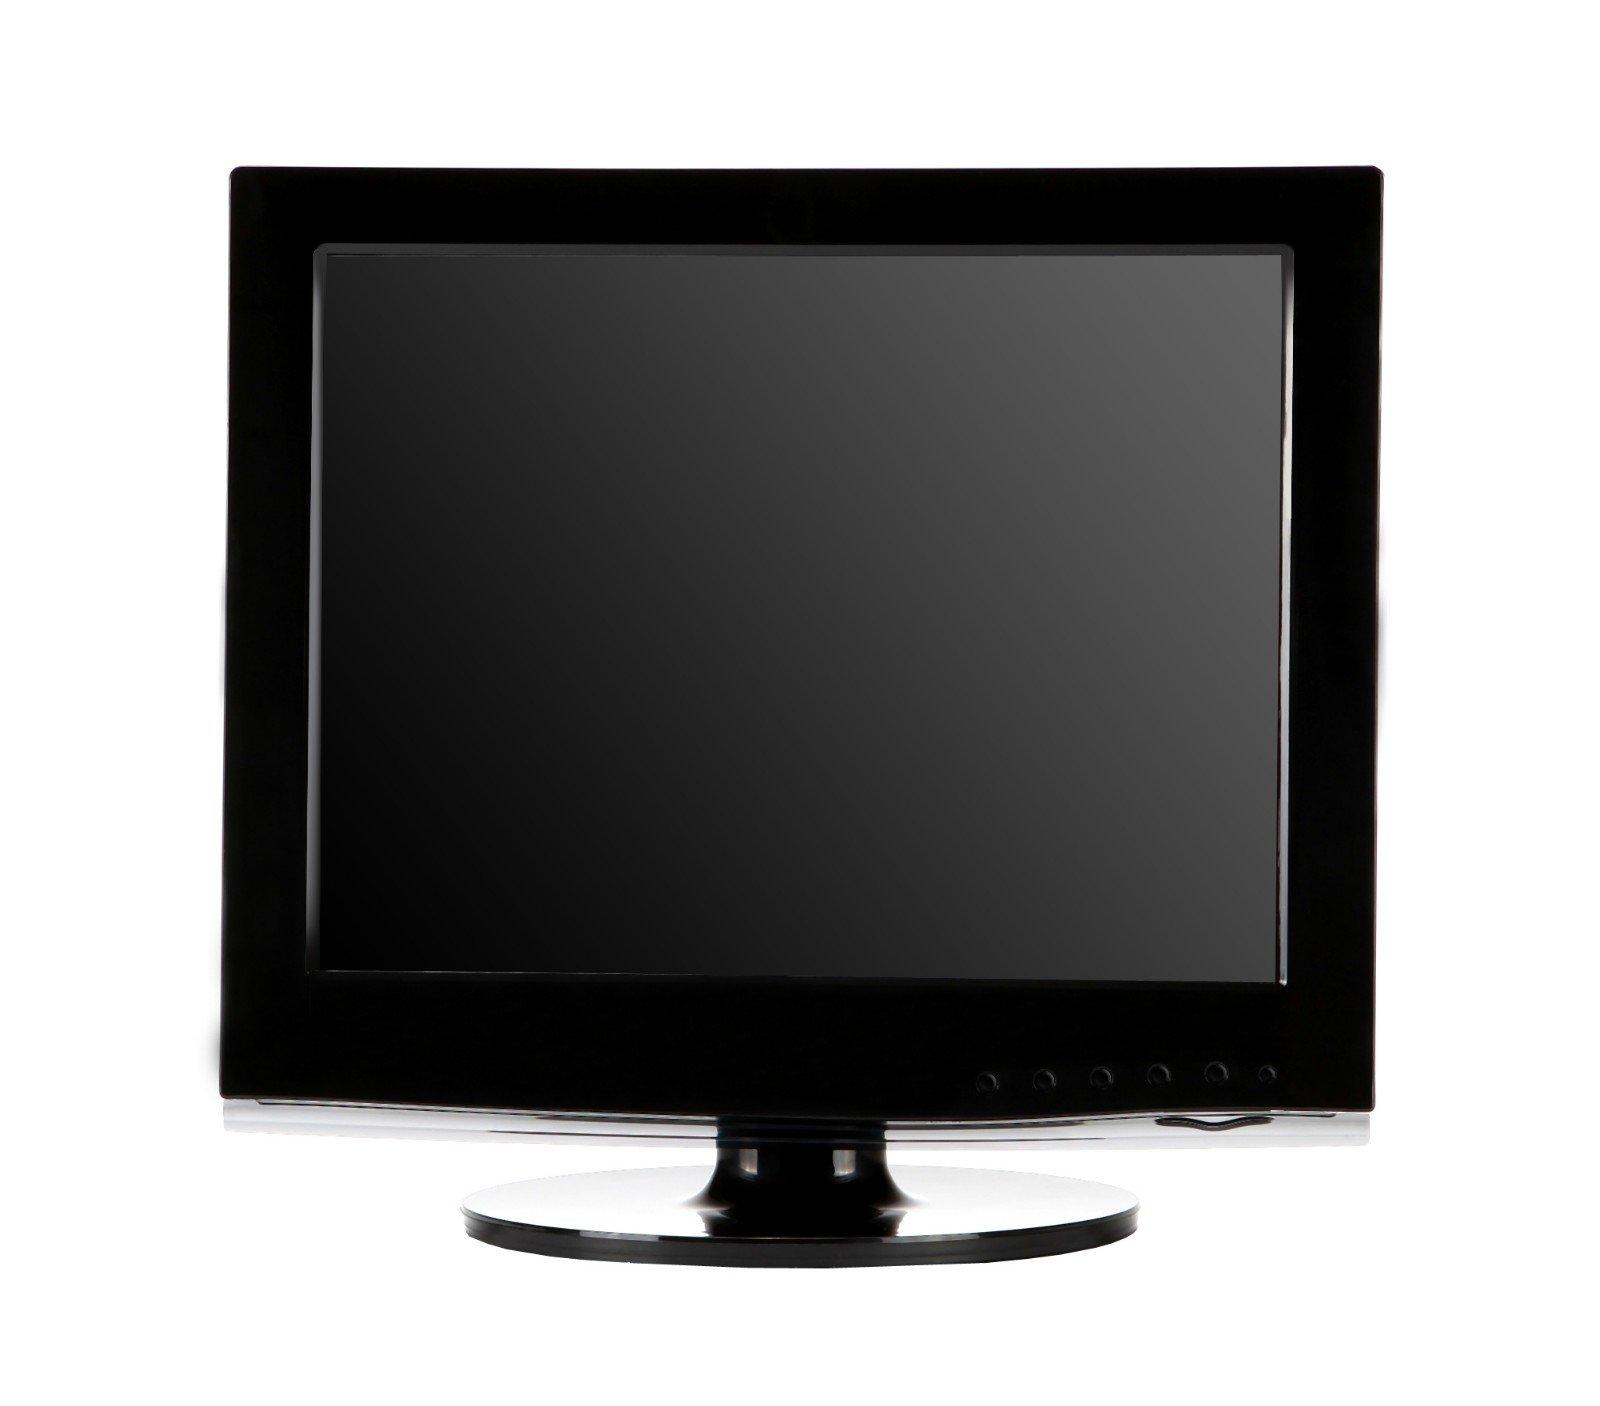 Xinyao LCD professional design monitor 15 lcd with hdmi output for lcd screen